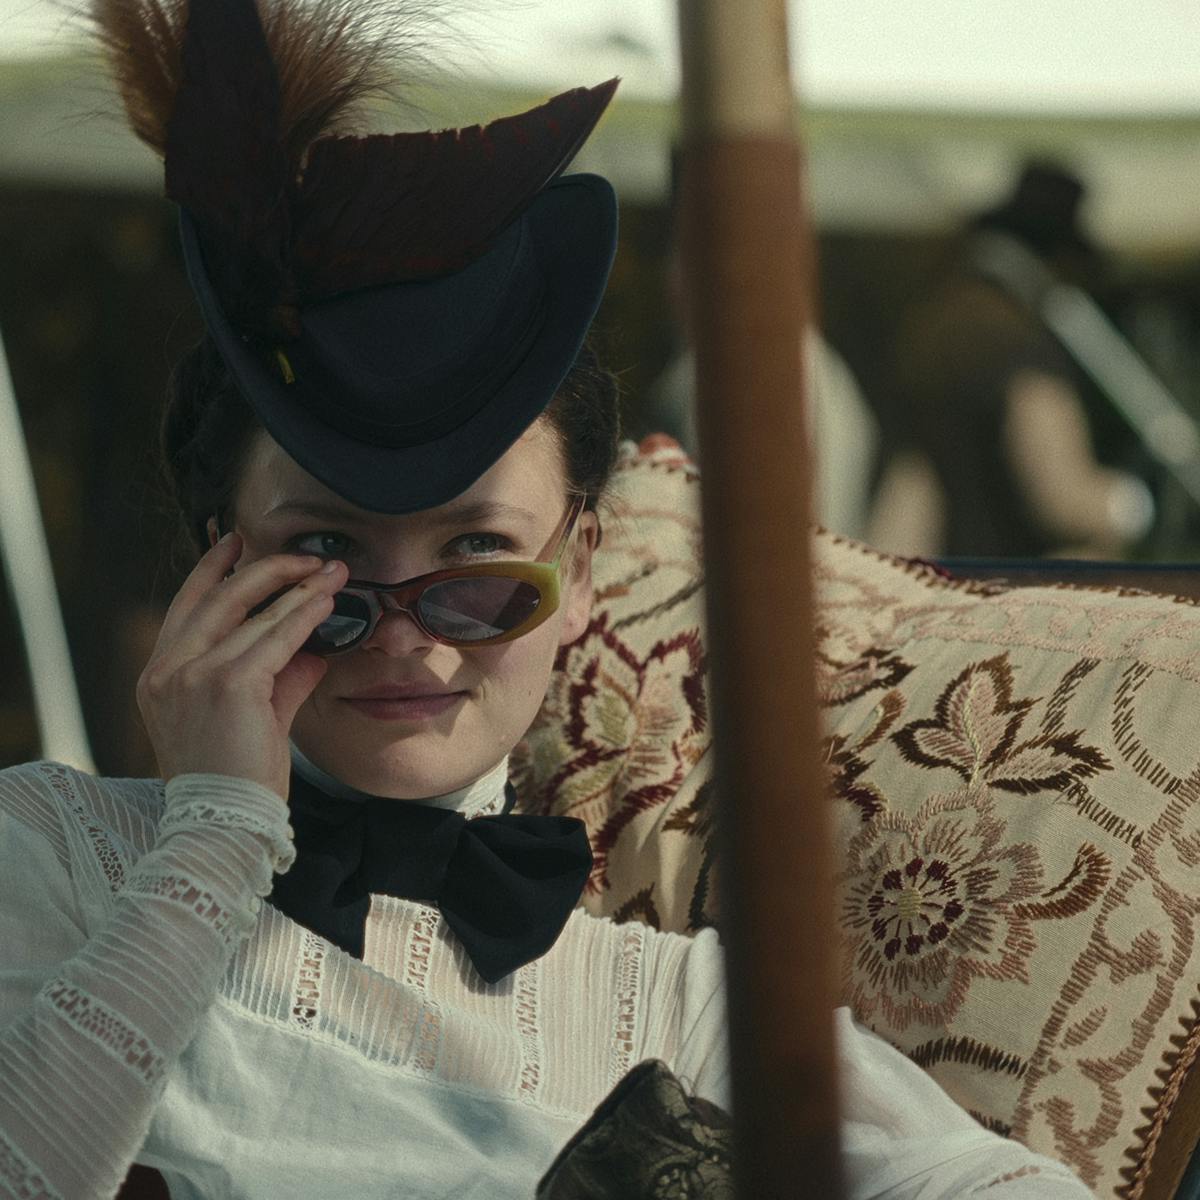 Elisabeth (Devrim Lingnau) wears a white shirt and black necktie, as well as a feathered black cap and sunglasses.